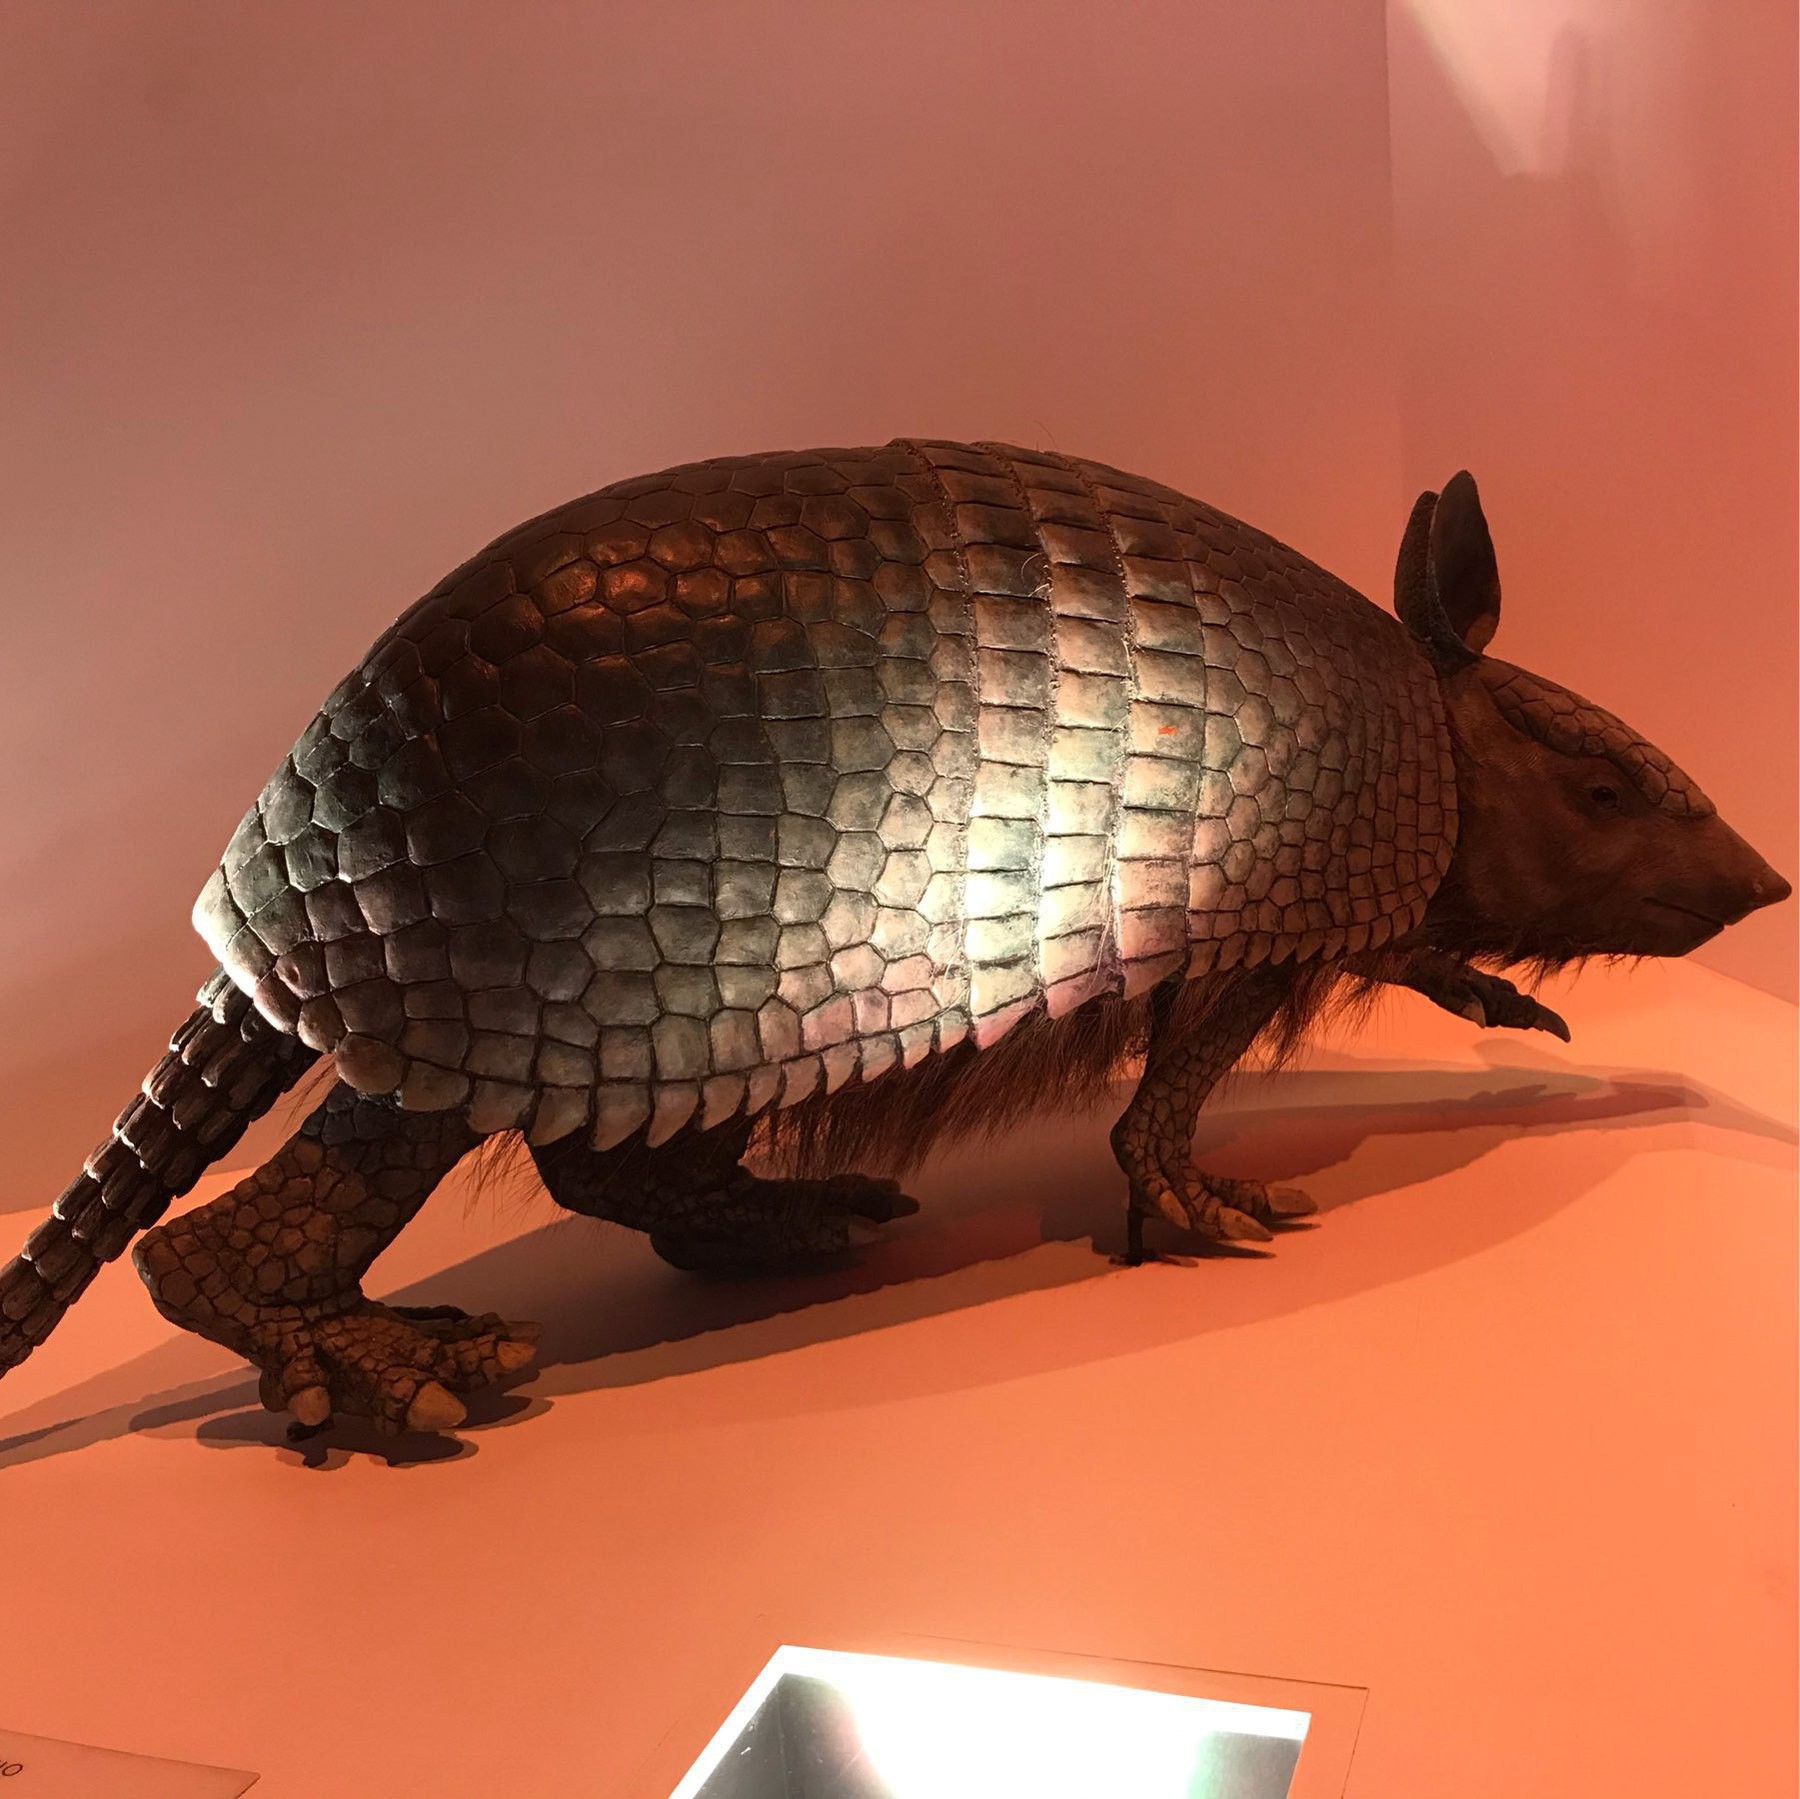 armadillo with fur coming out from under its shell